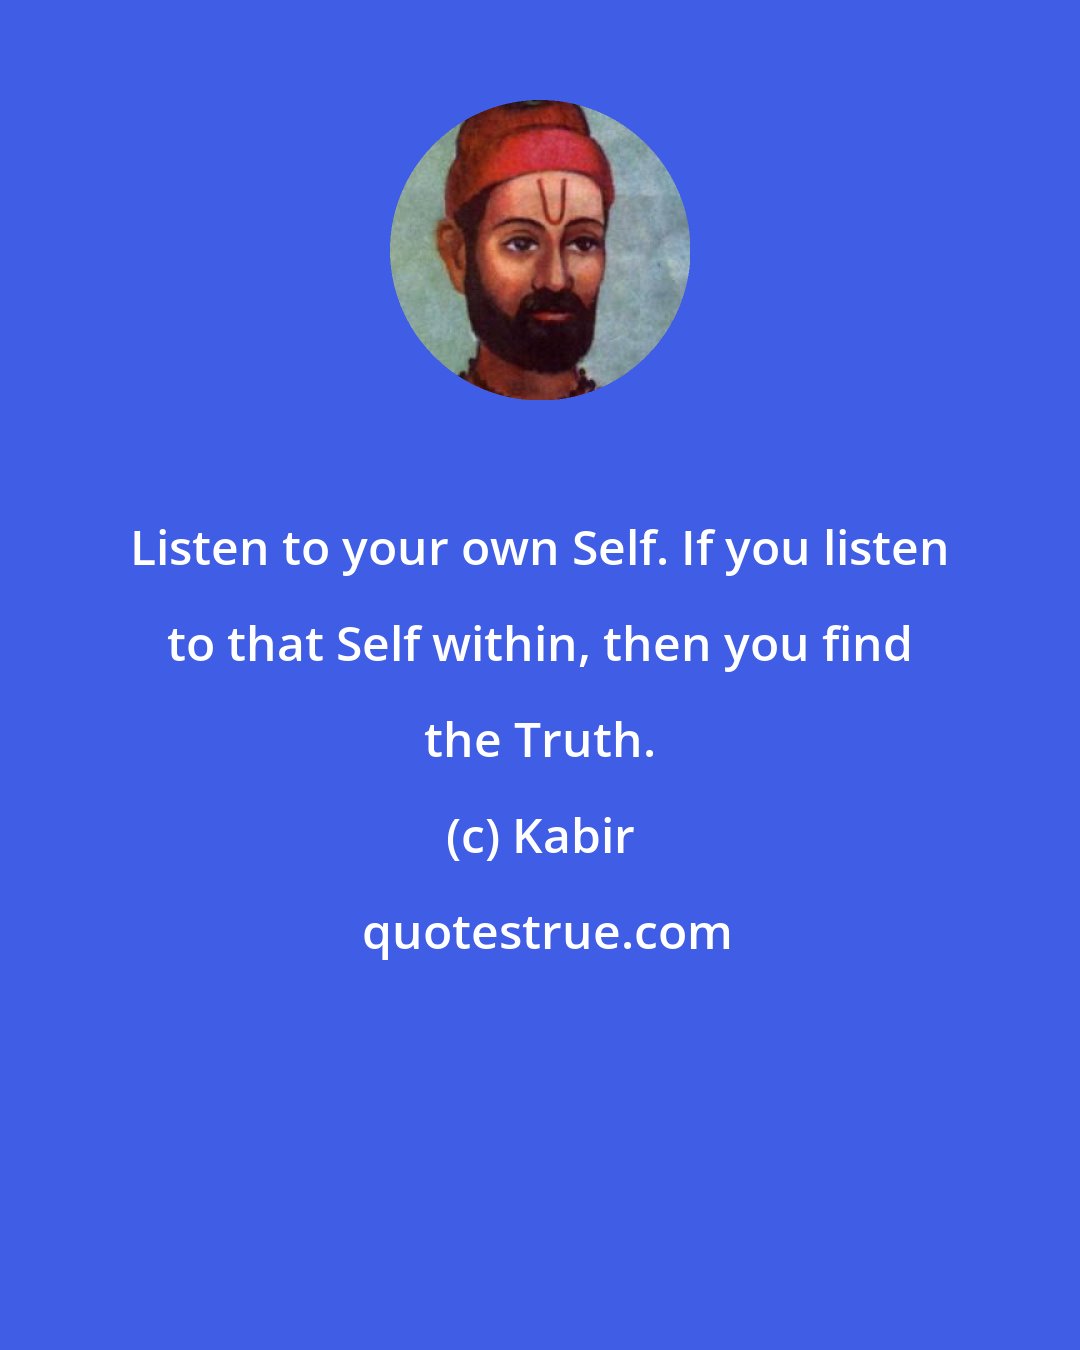 Kabir: Listen to your own Self. If you listen to that Self within, then you find the Truth.